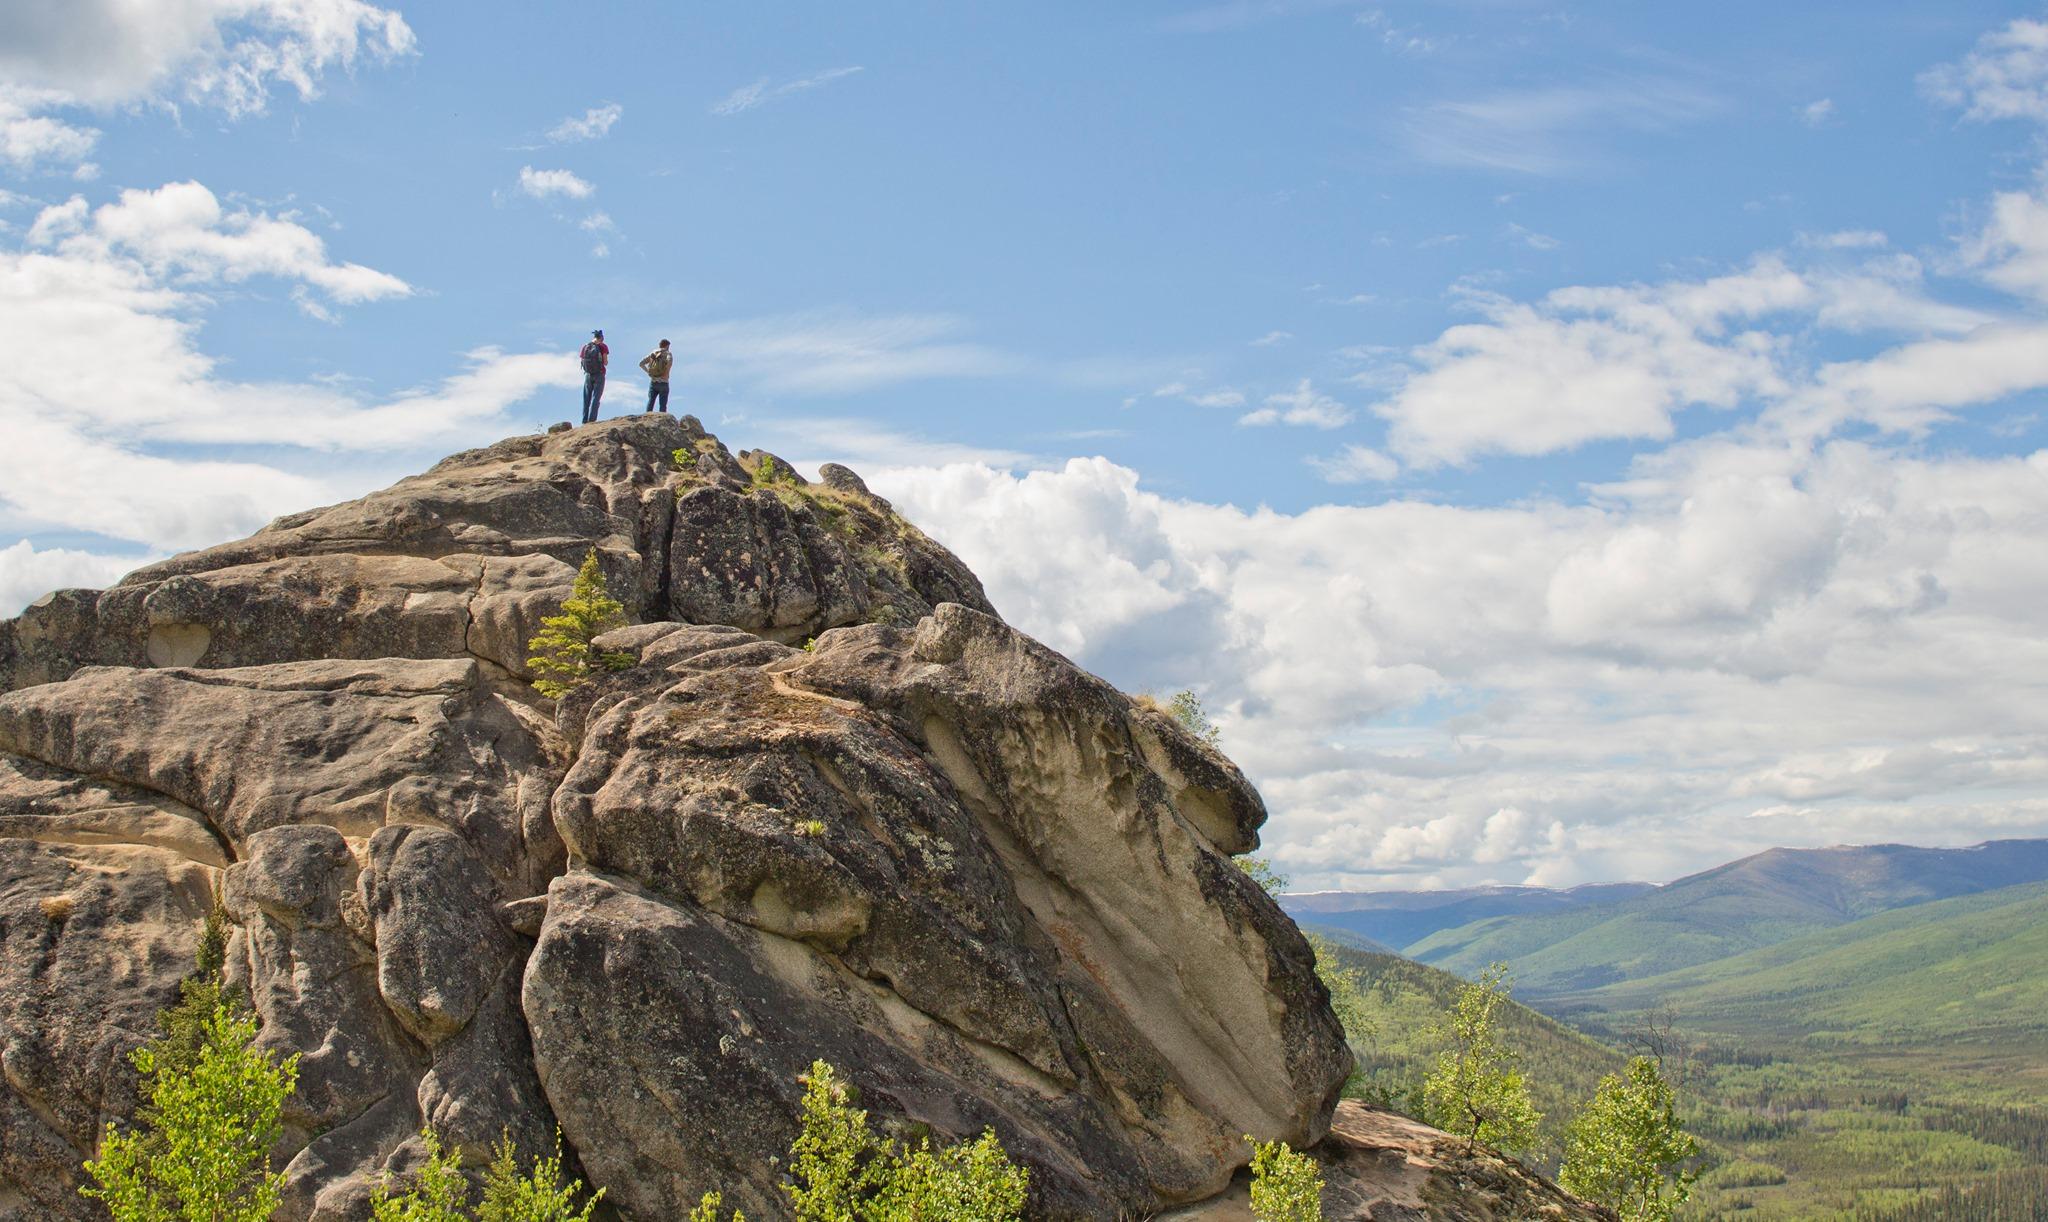 Two Hikers stand on top of a very large granite boulder, looking out across the landscape